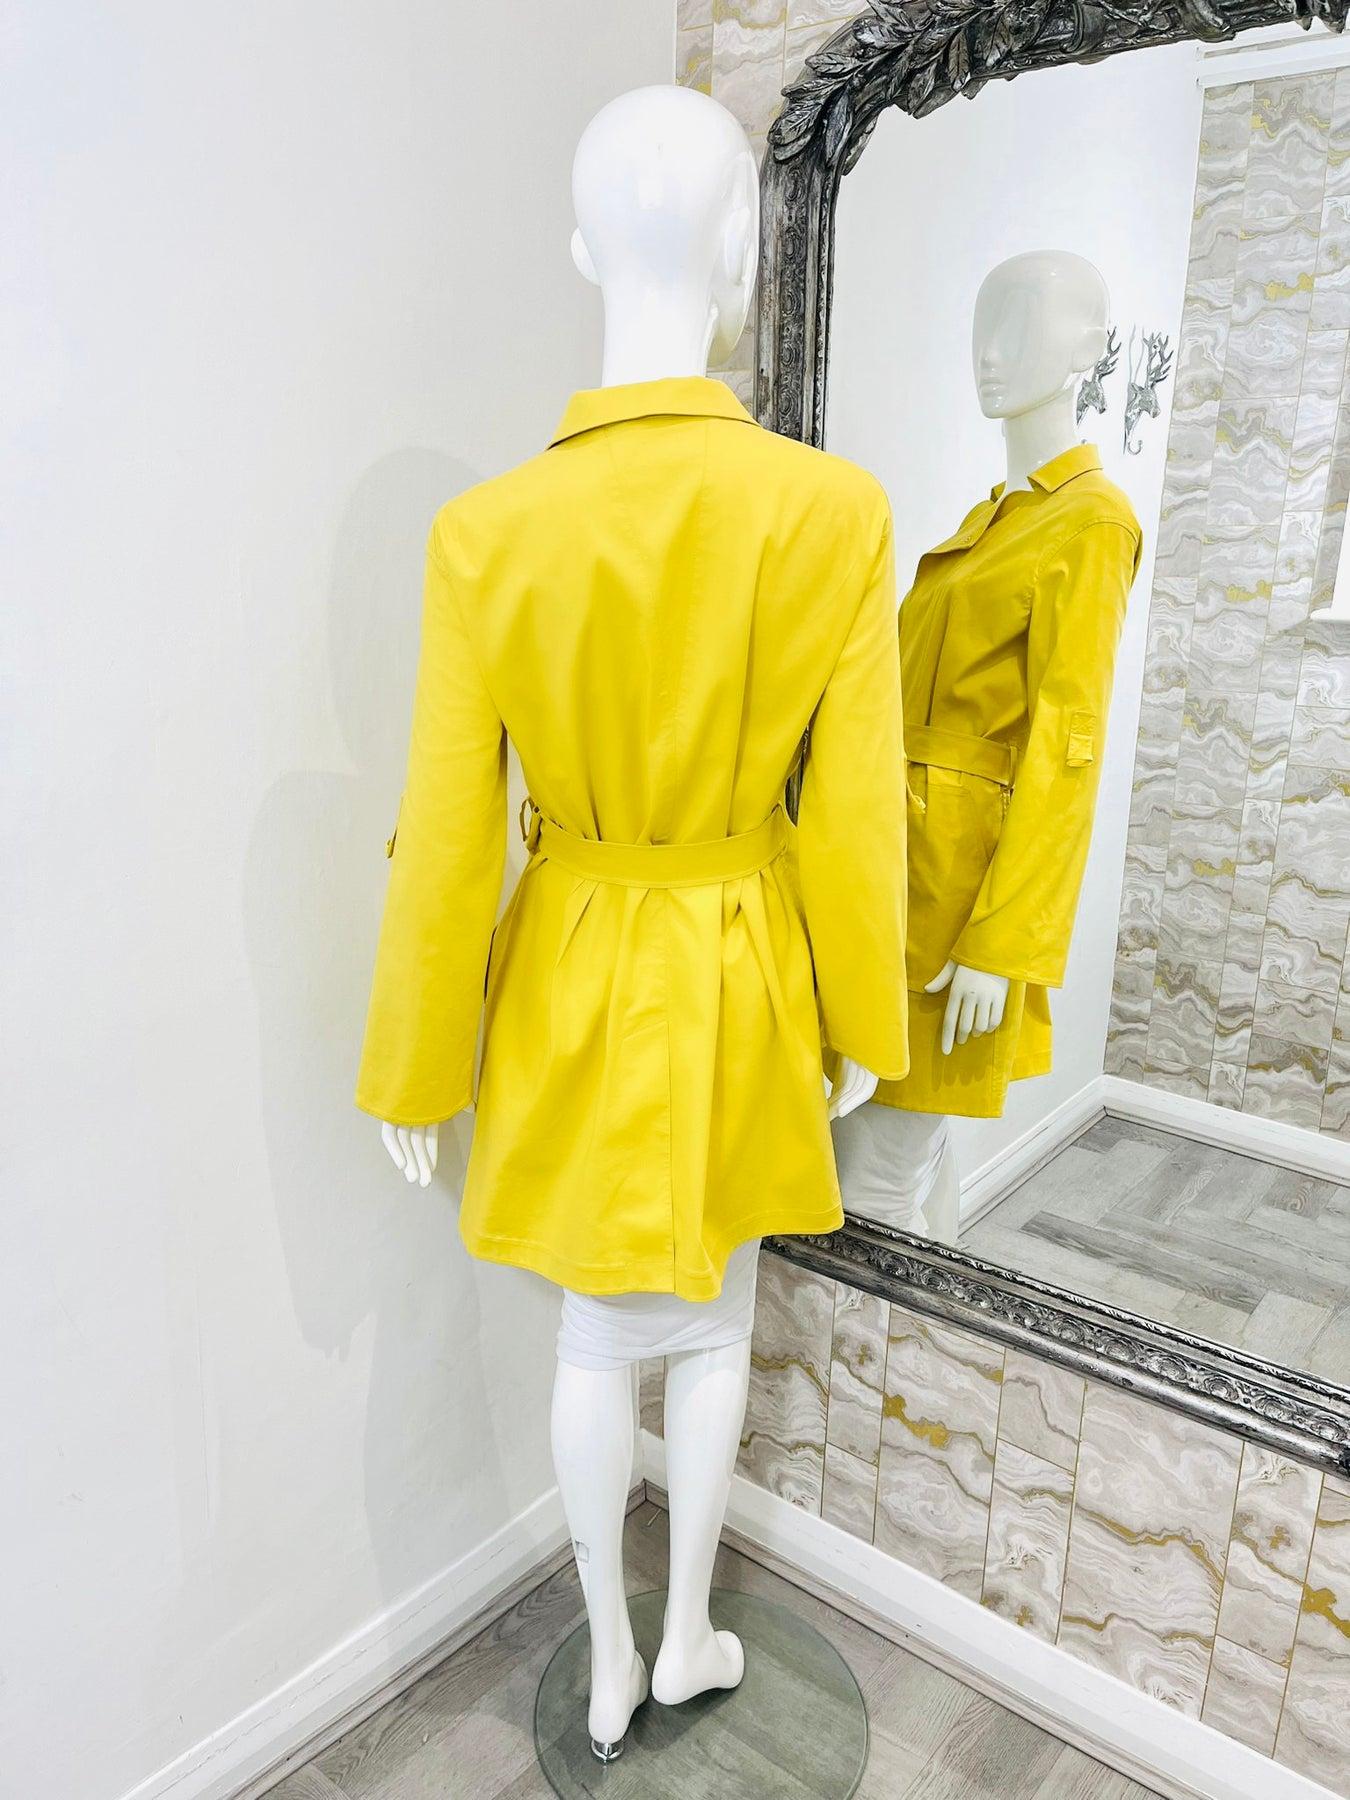 Hermes Cotton Trench Coat In Excellent Condition For Sale In London, GB